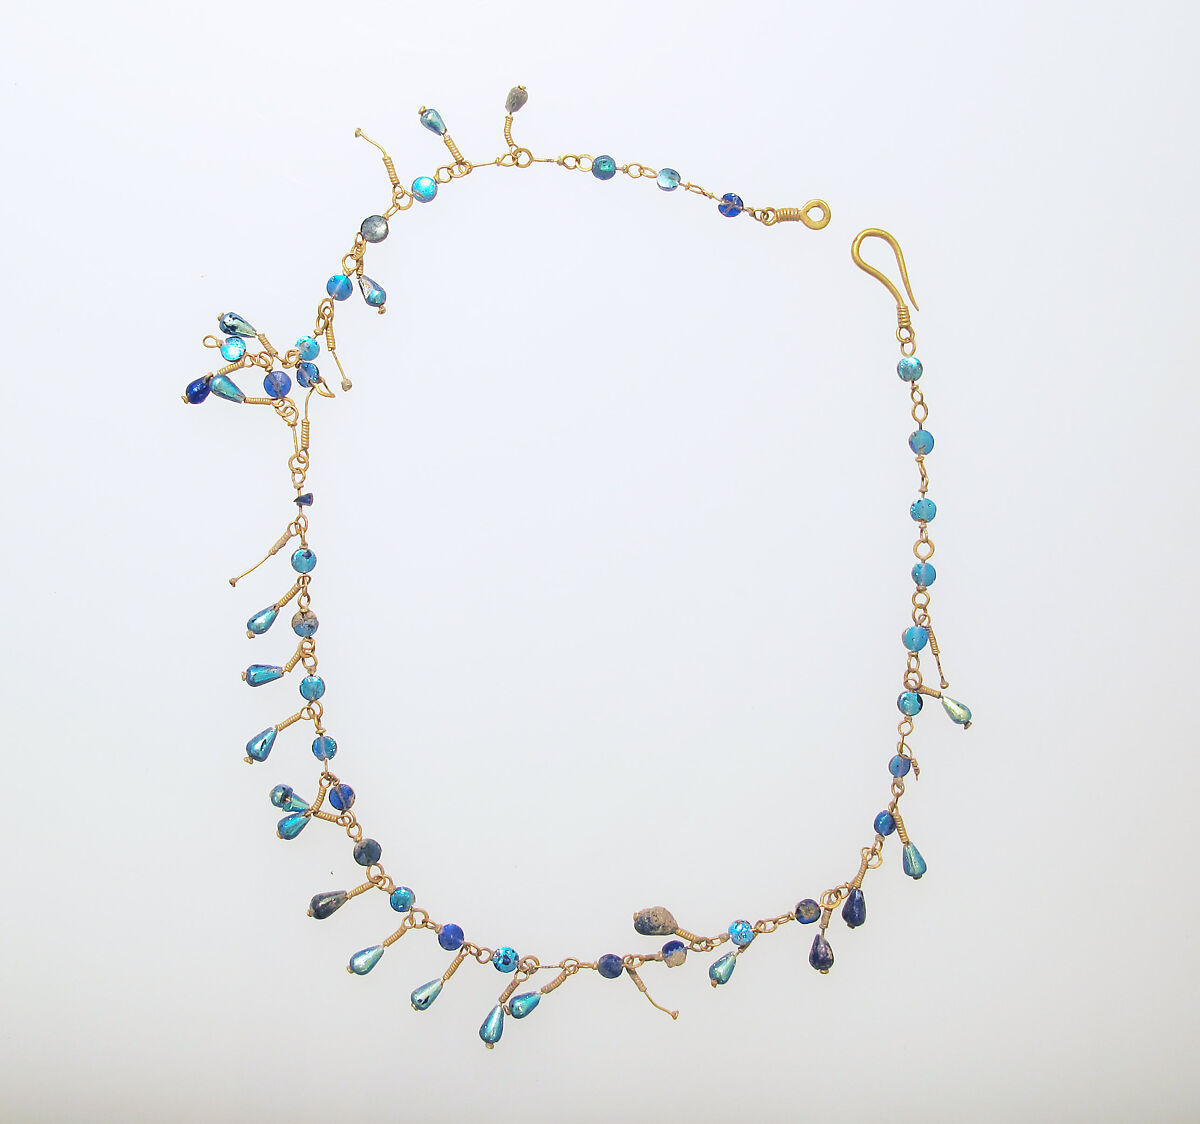 Necklace with blue beads, Gold, blue glass 